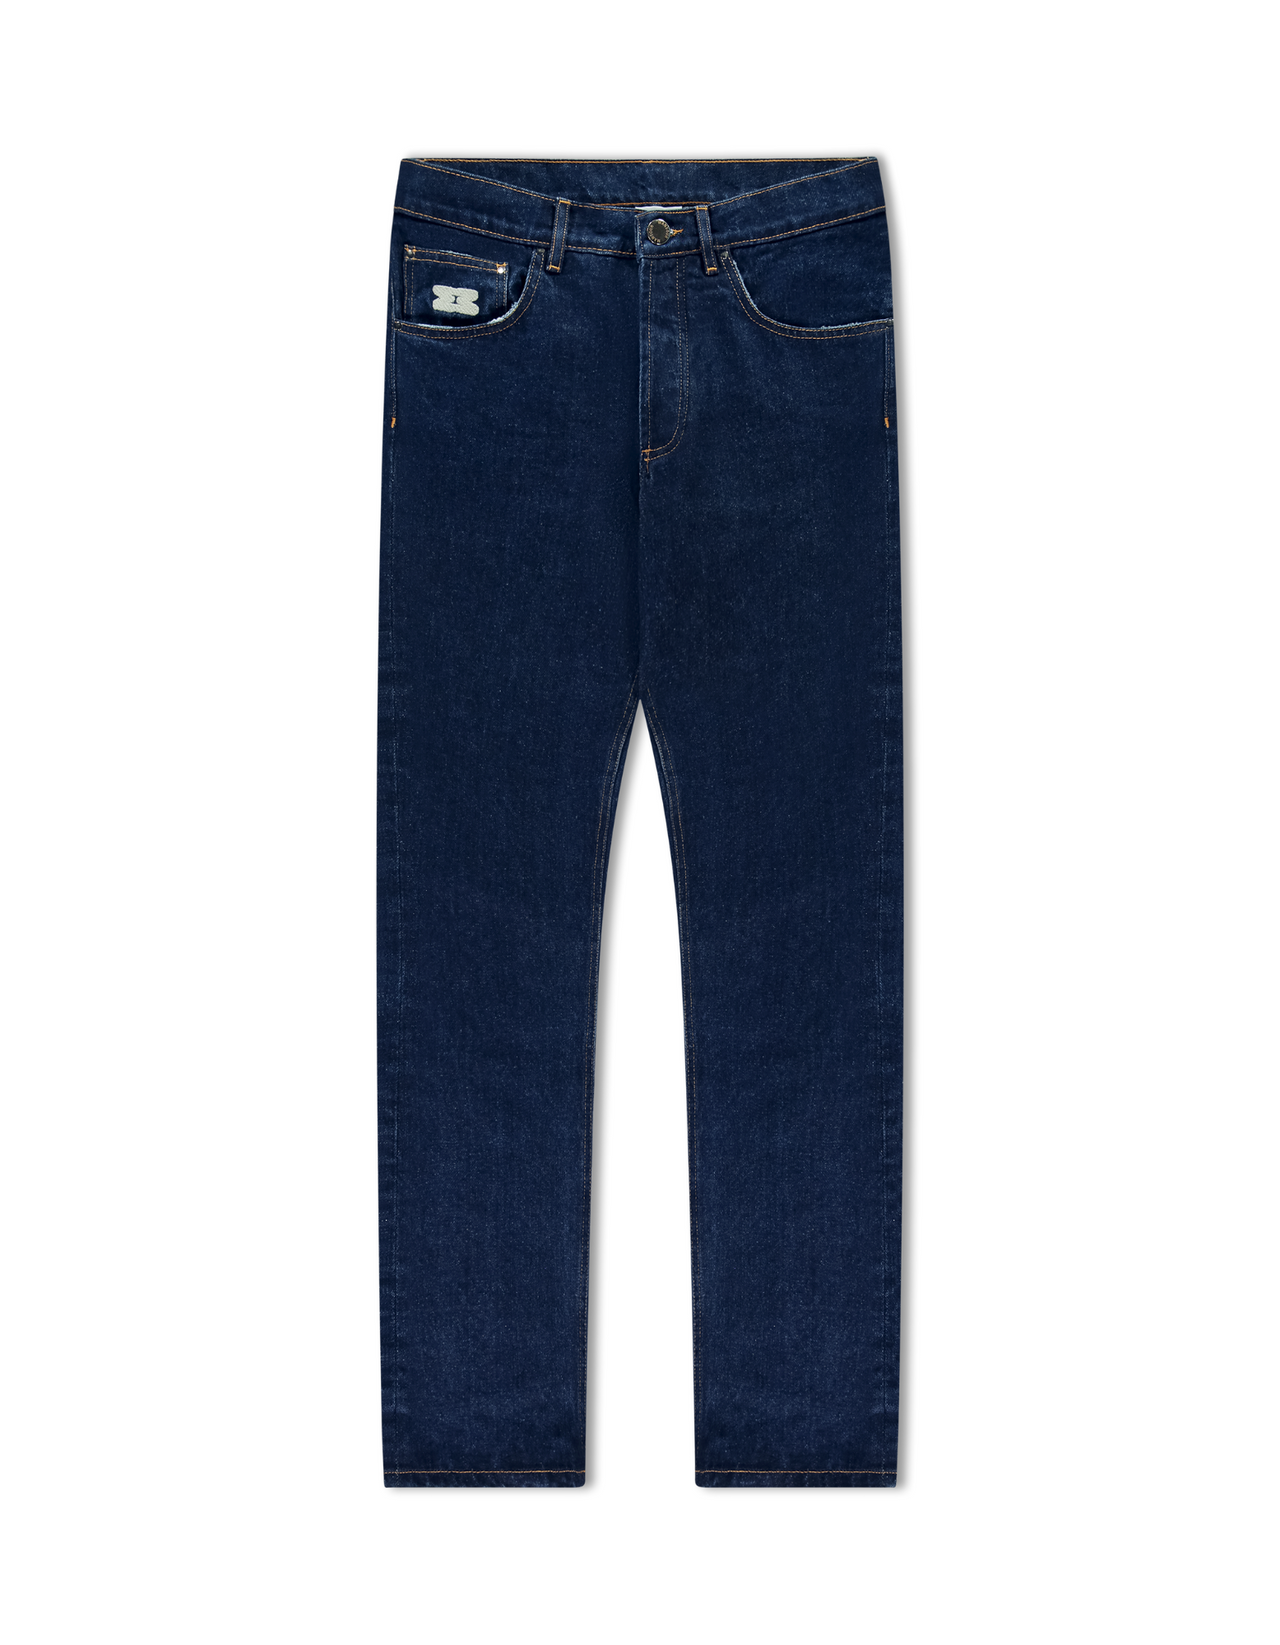 Regular straight fit jeans in blue